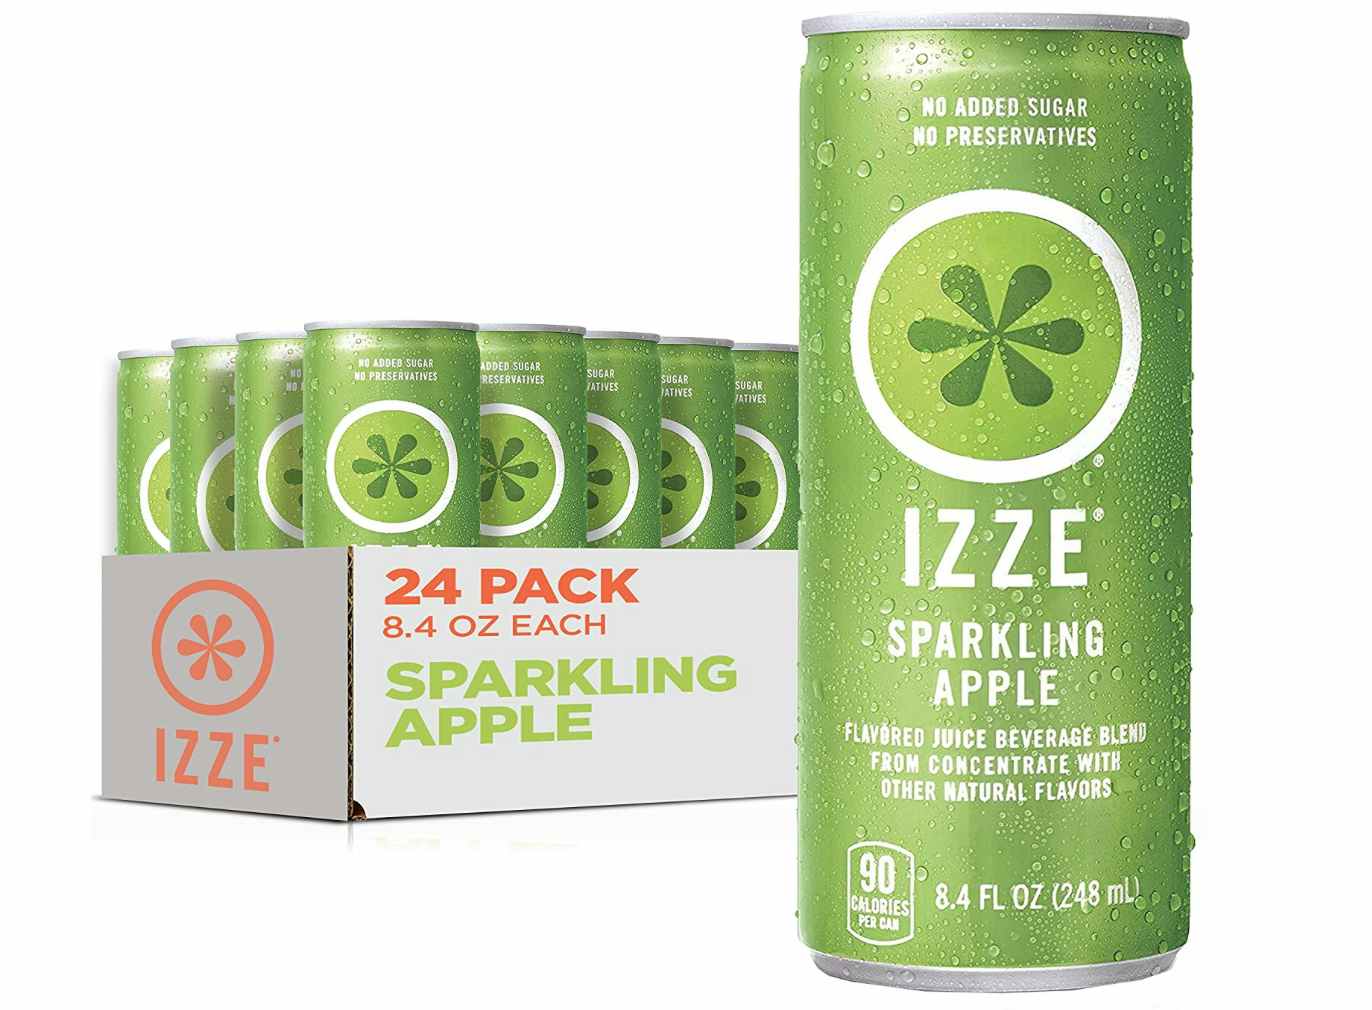 A green pack of apple sparkling juice with one can in front